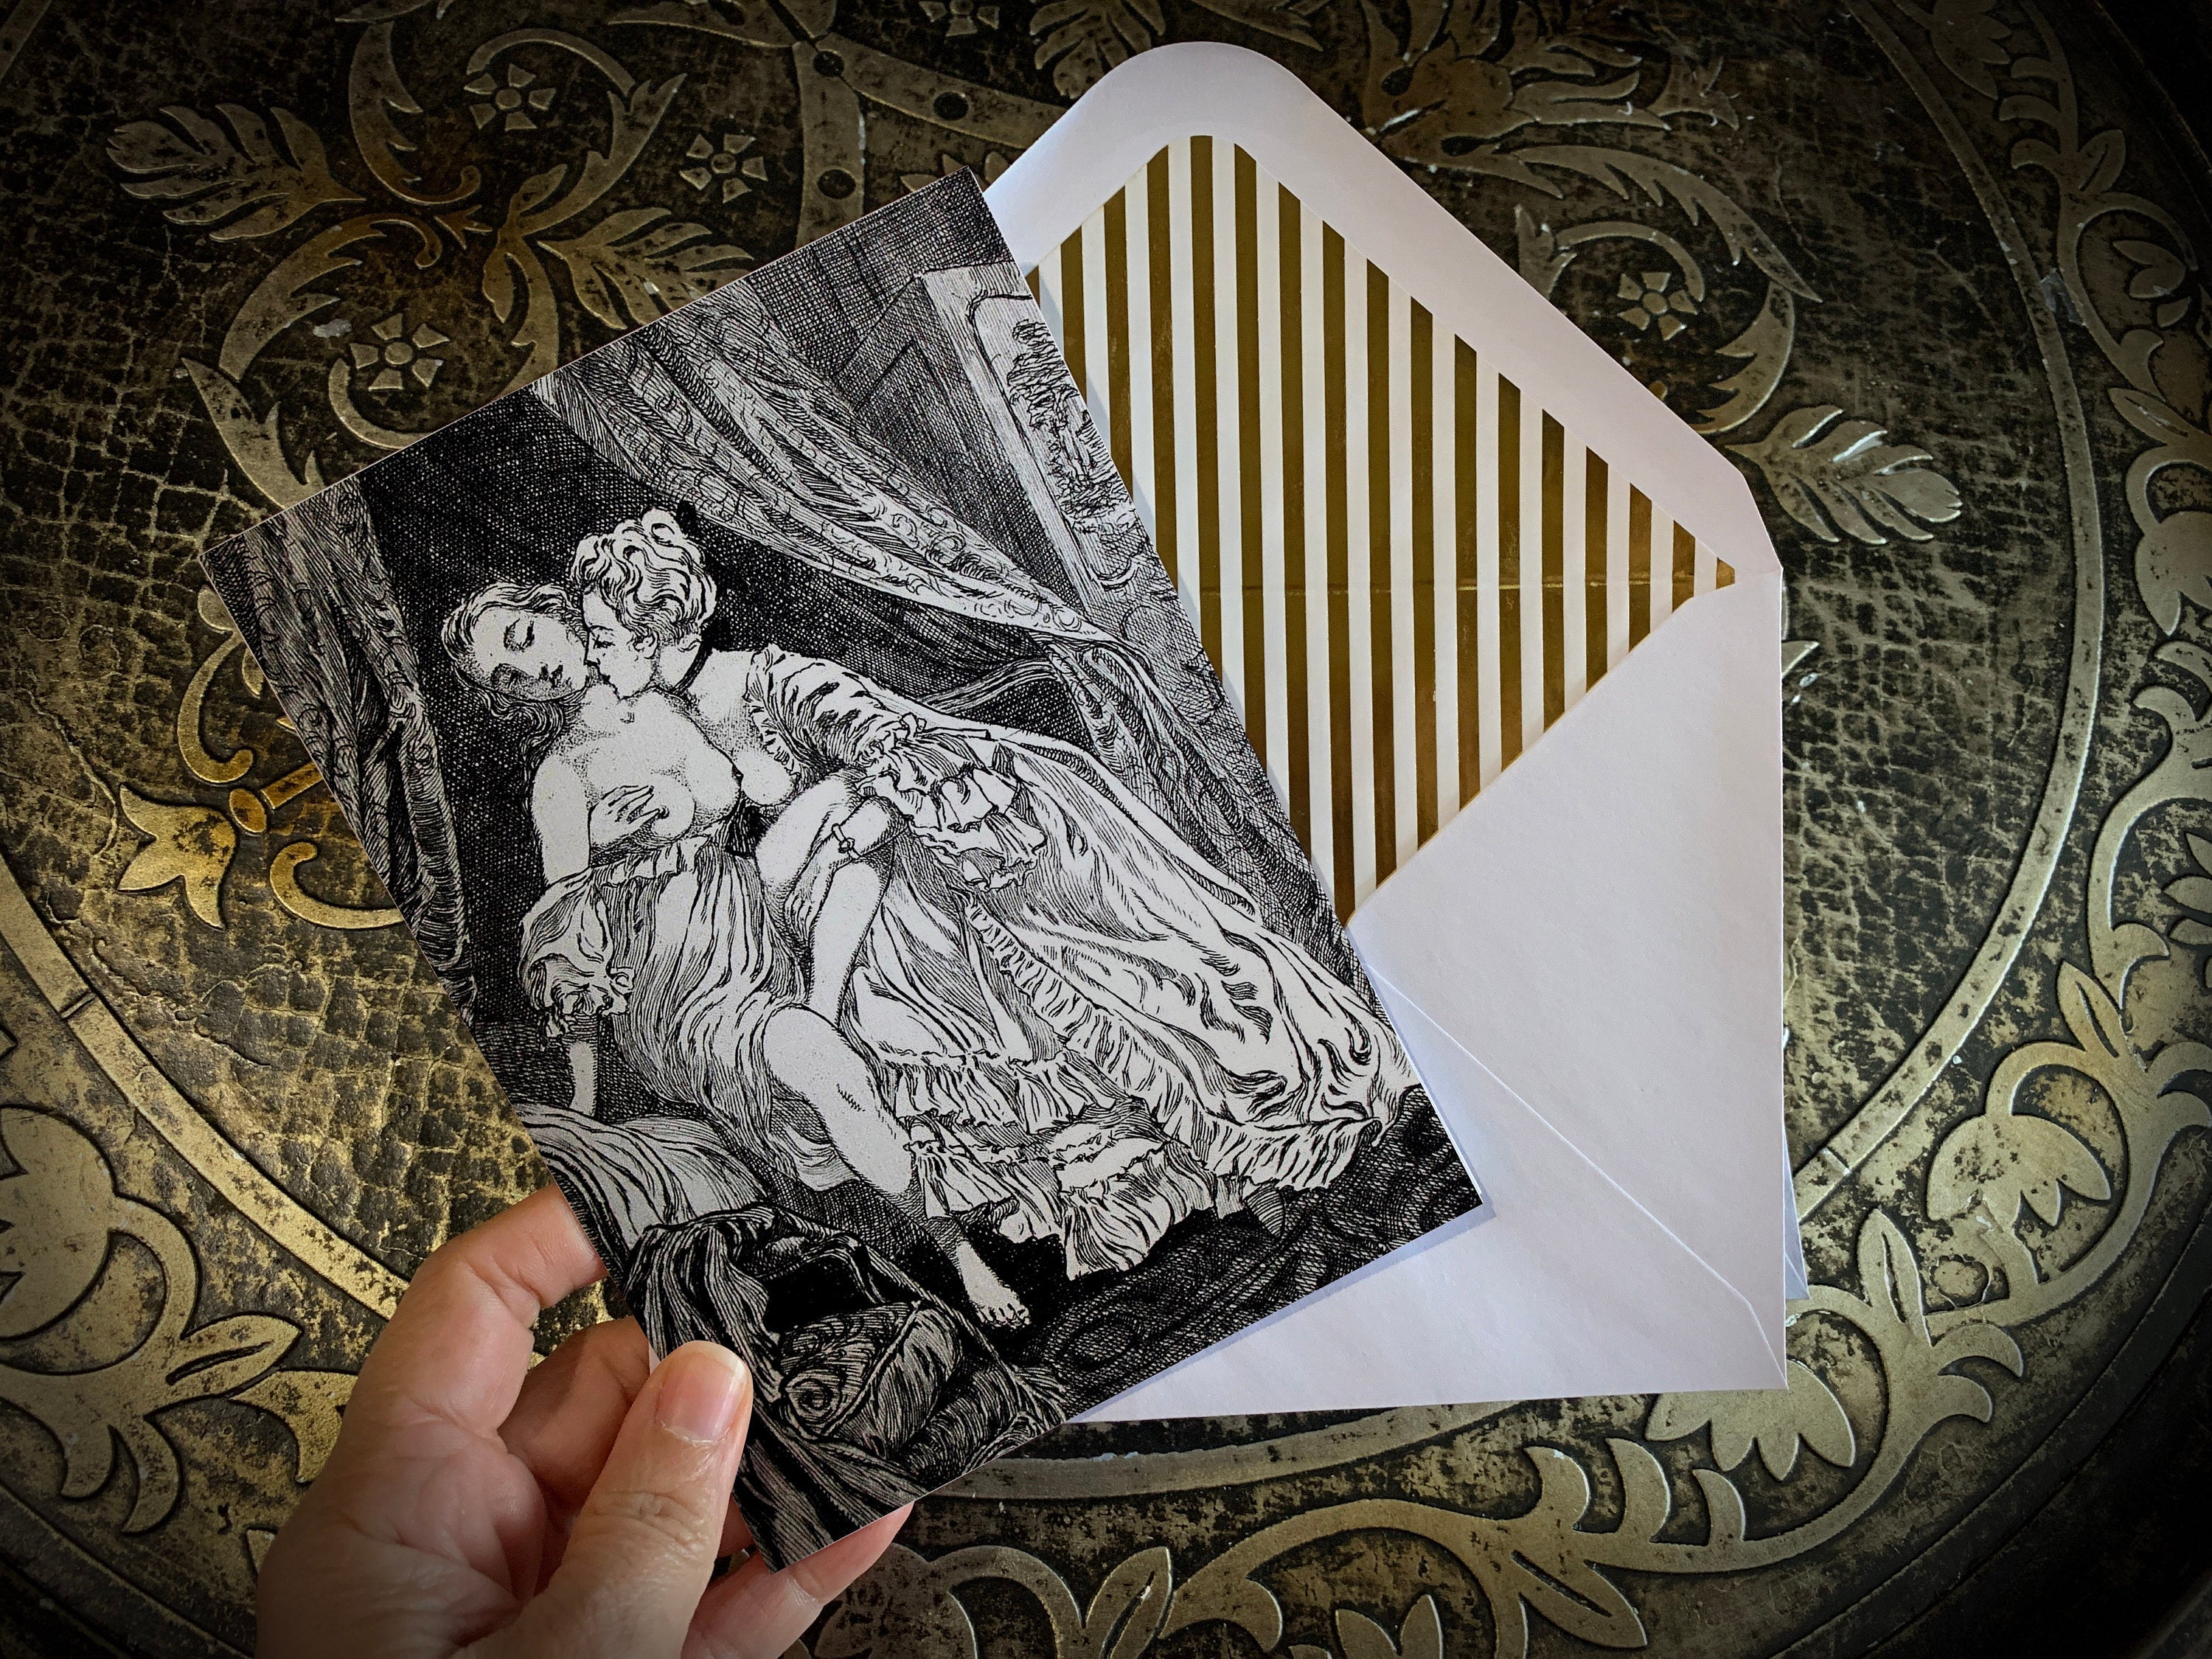 Lesbian Lovers by Martin van Maële, Erotic Greeting Card with Gold Foil Envelope, 1 Card/Envelope